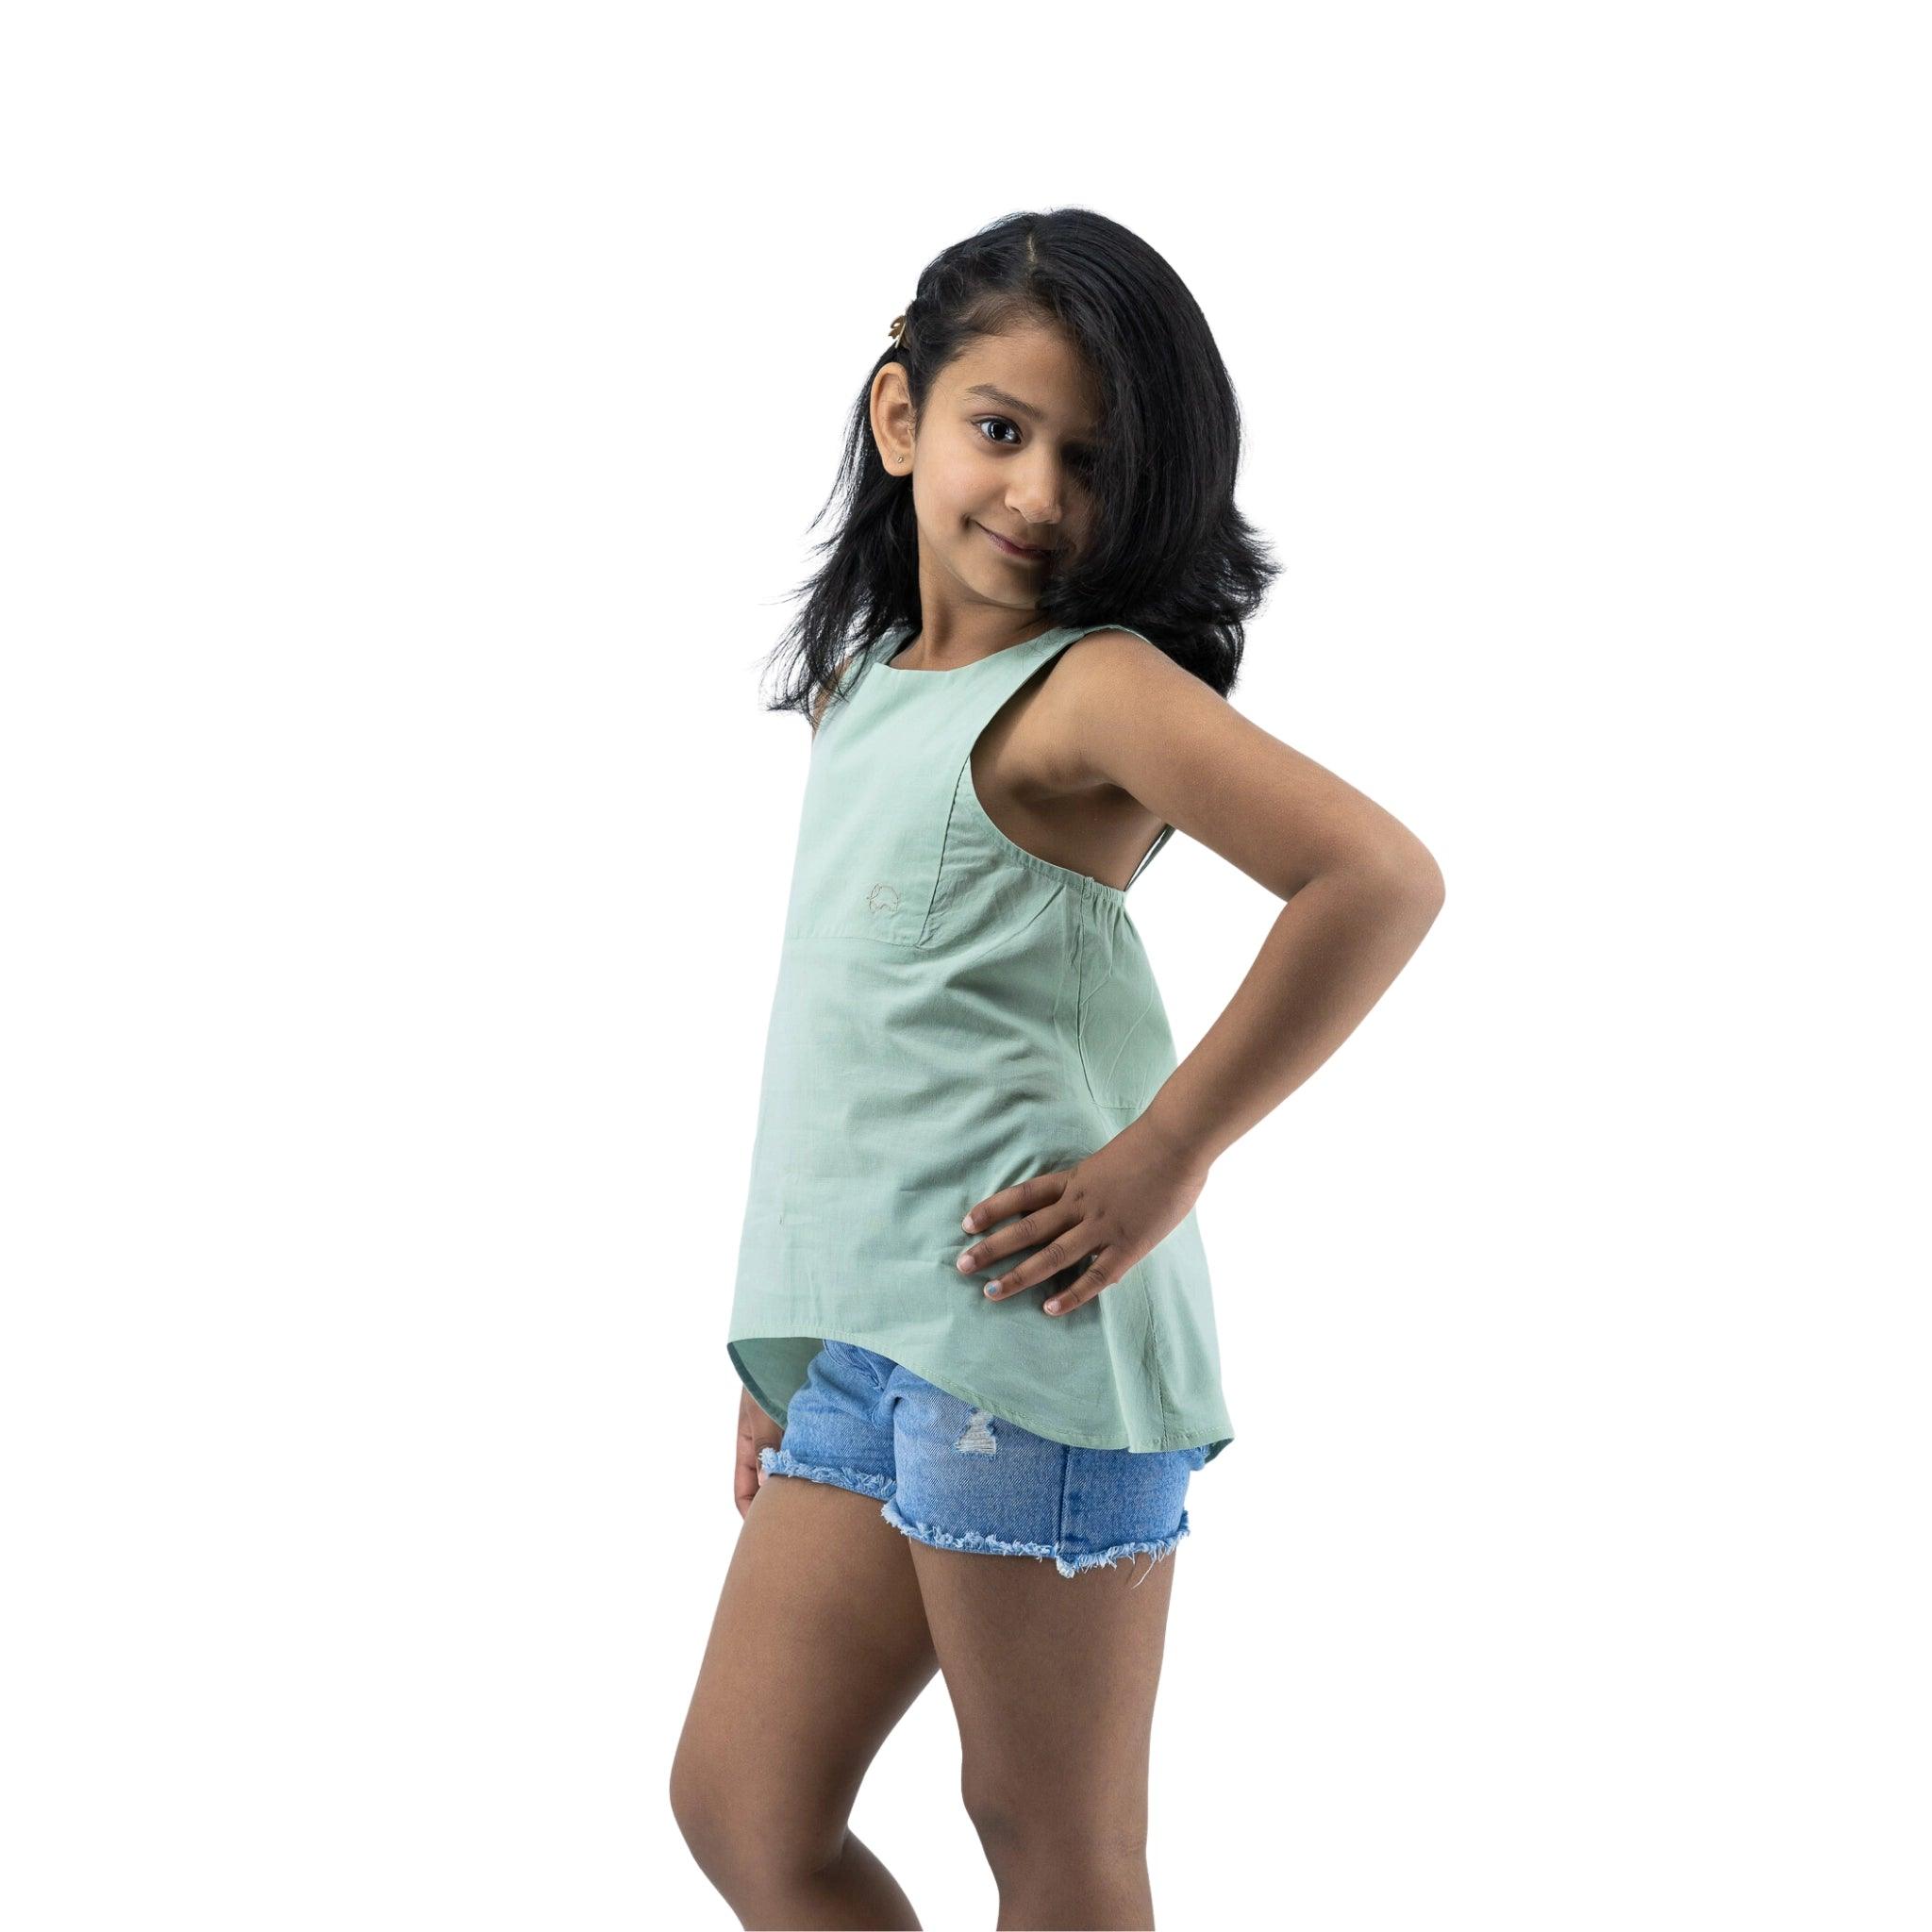 Young girl in a Smoke Green Cotton Bib Neck Top by Karee and denim shorts posing with hands on hips, smiling slightly, against a white background.